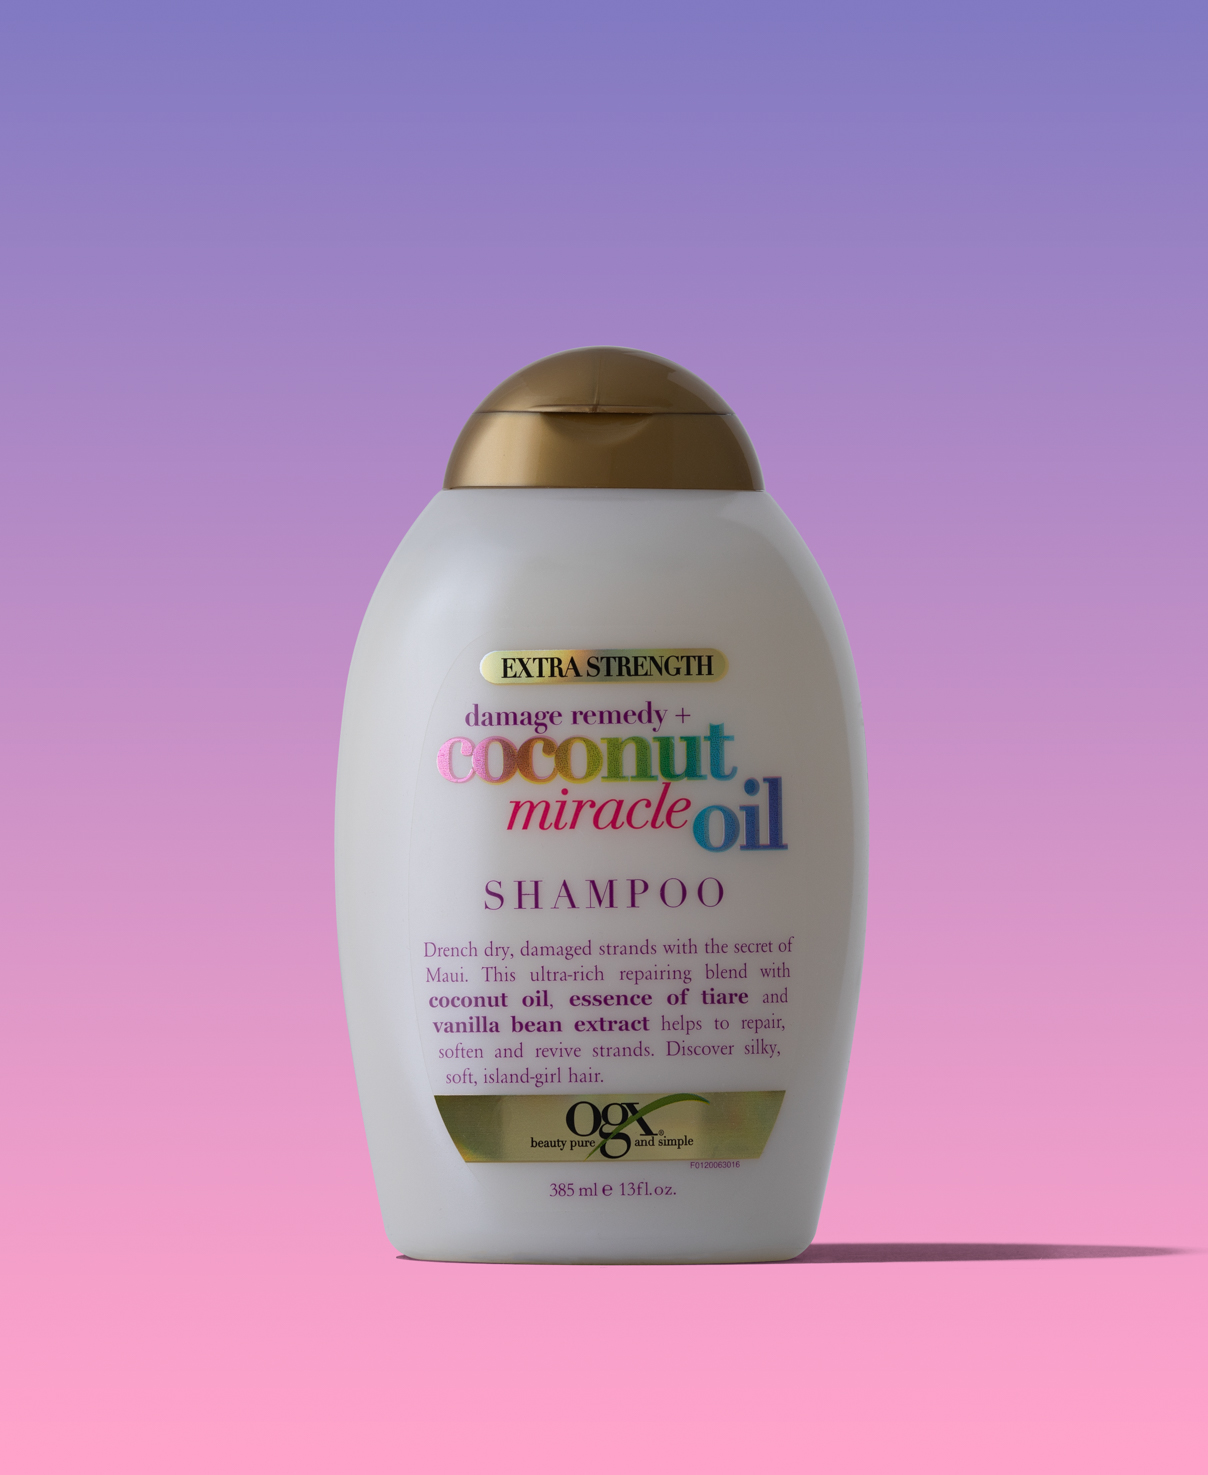 Extra Strength Damage Remedy + Coconut Miracle Oil Shampoo 13 fl | OGX Beauty